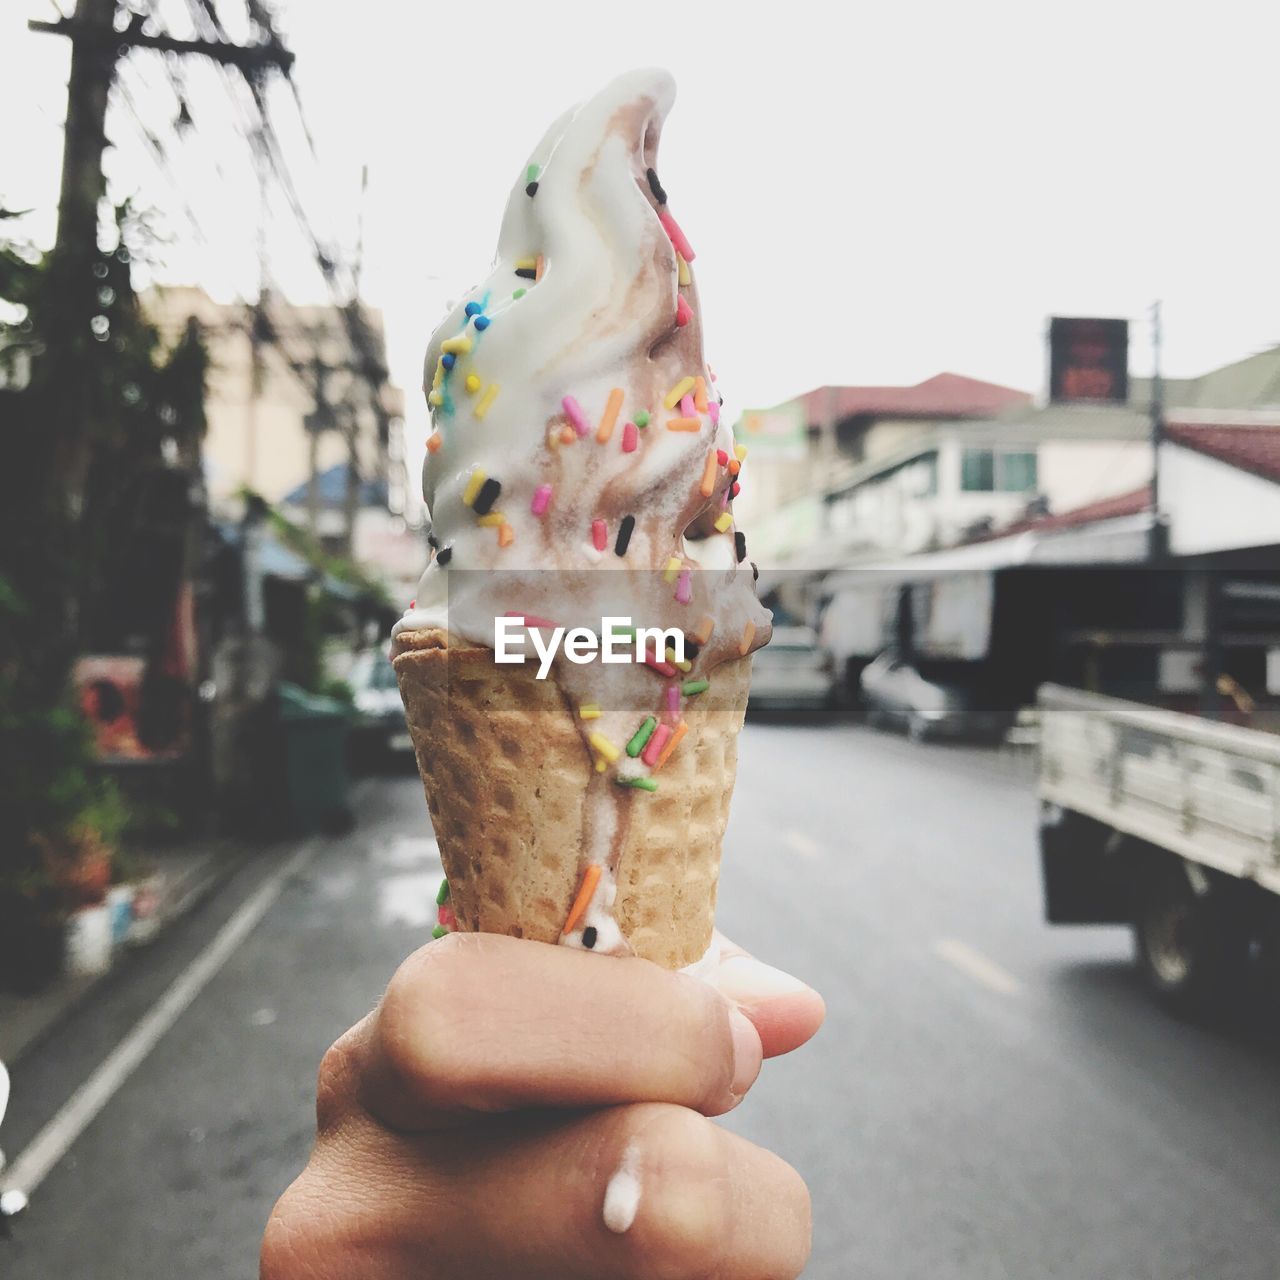 CLOSE-UP OF HAND HOLDING ICE CREAM CONE AGAINST THE SKY